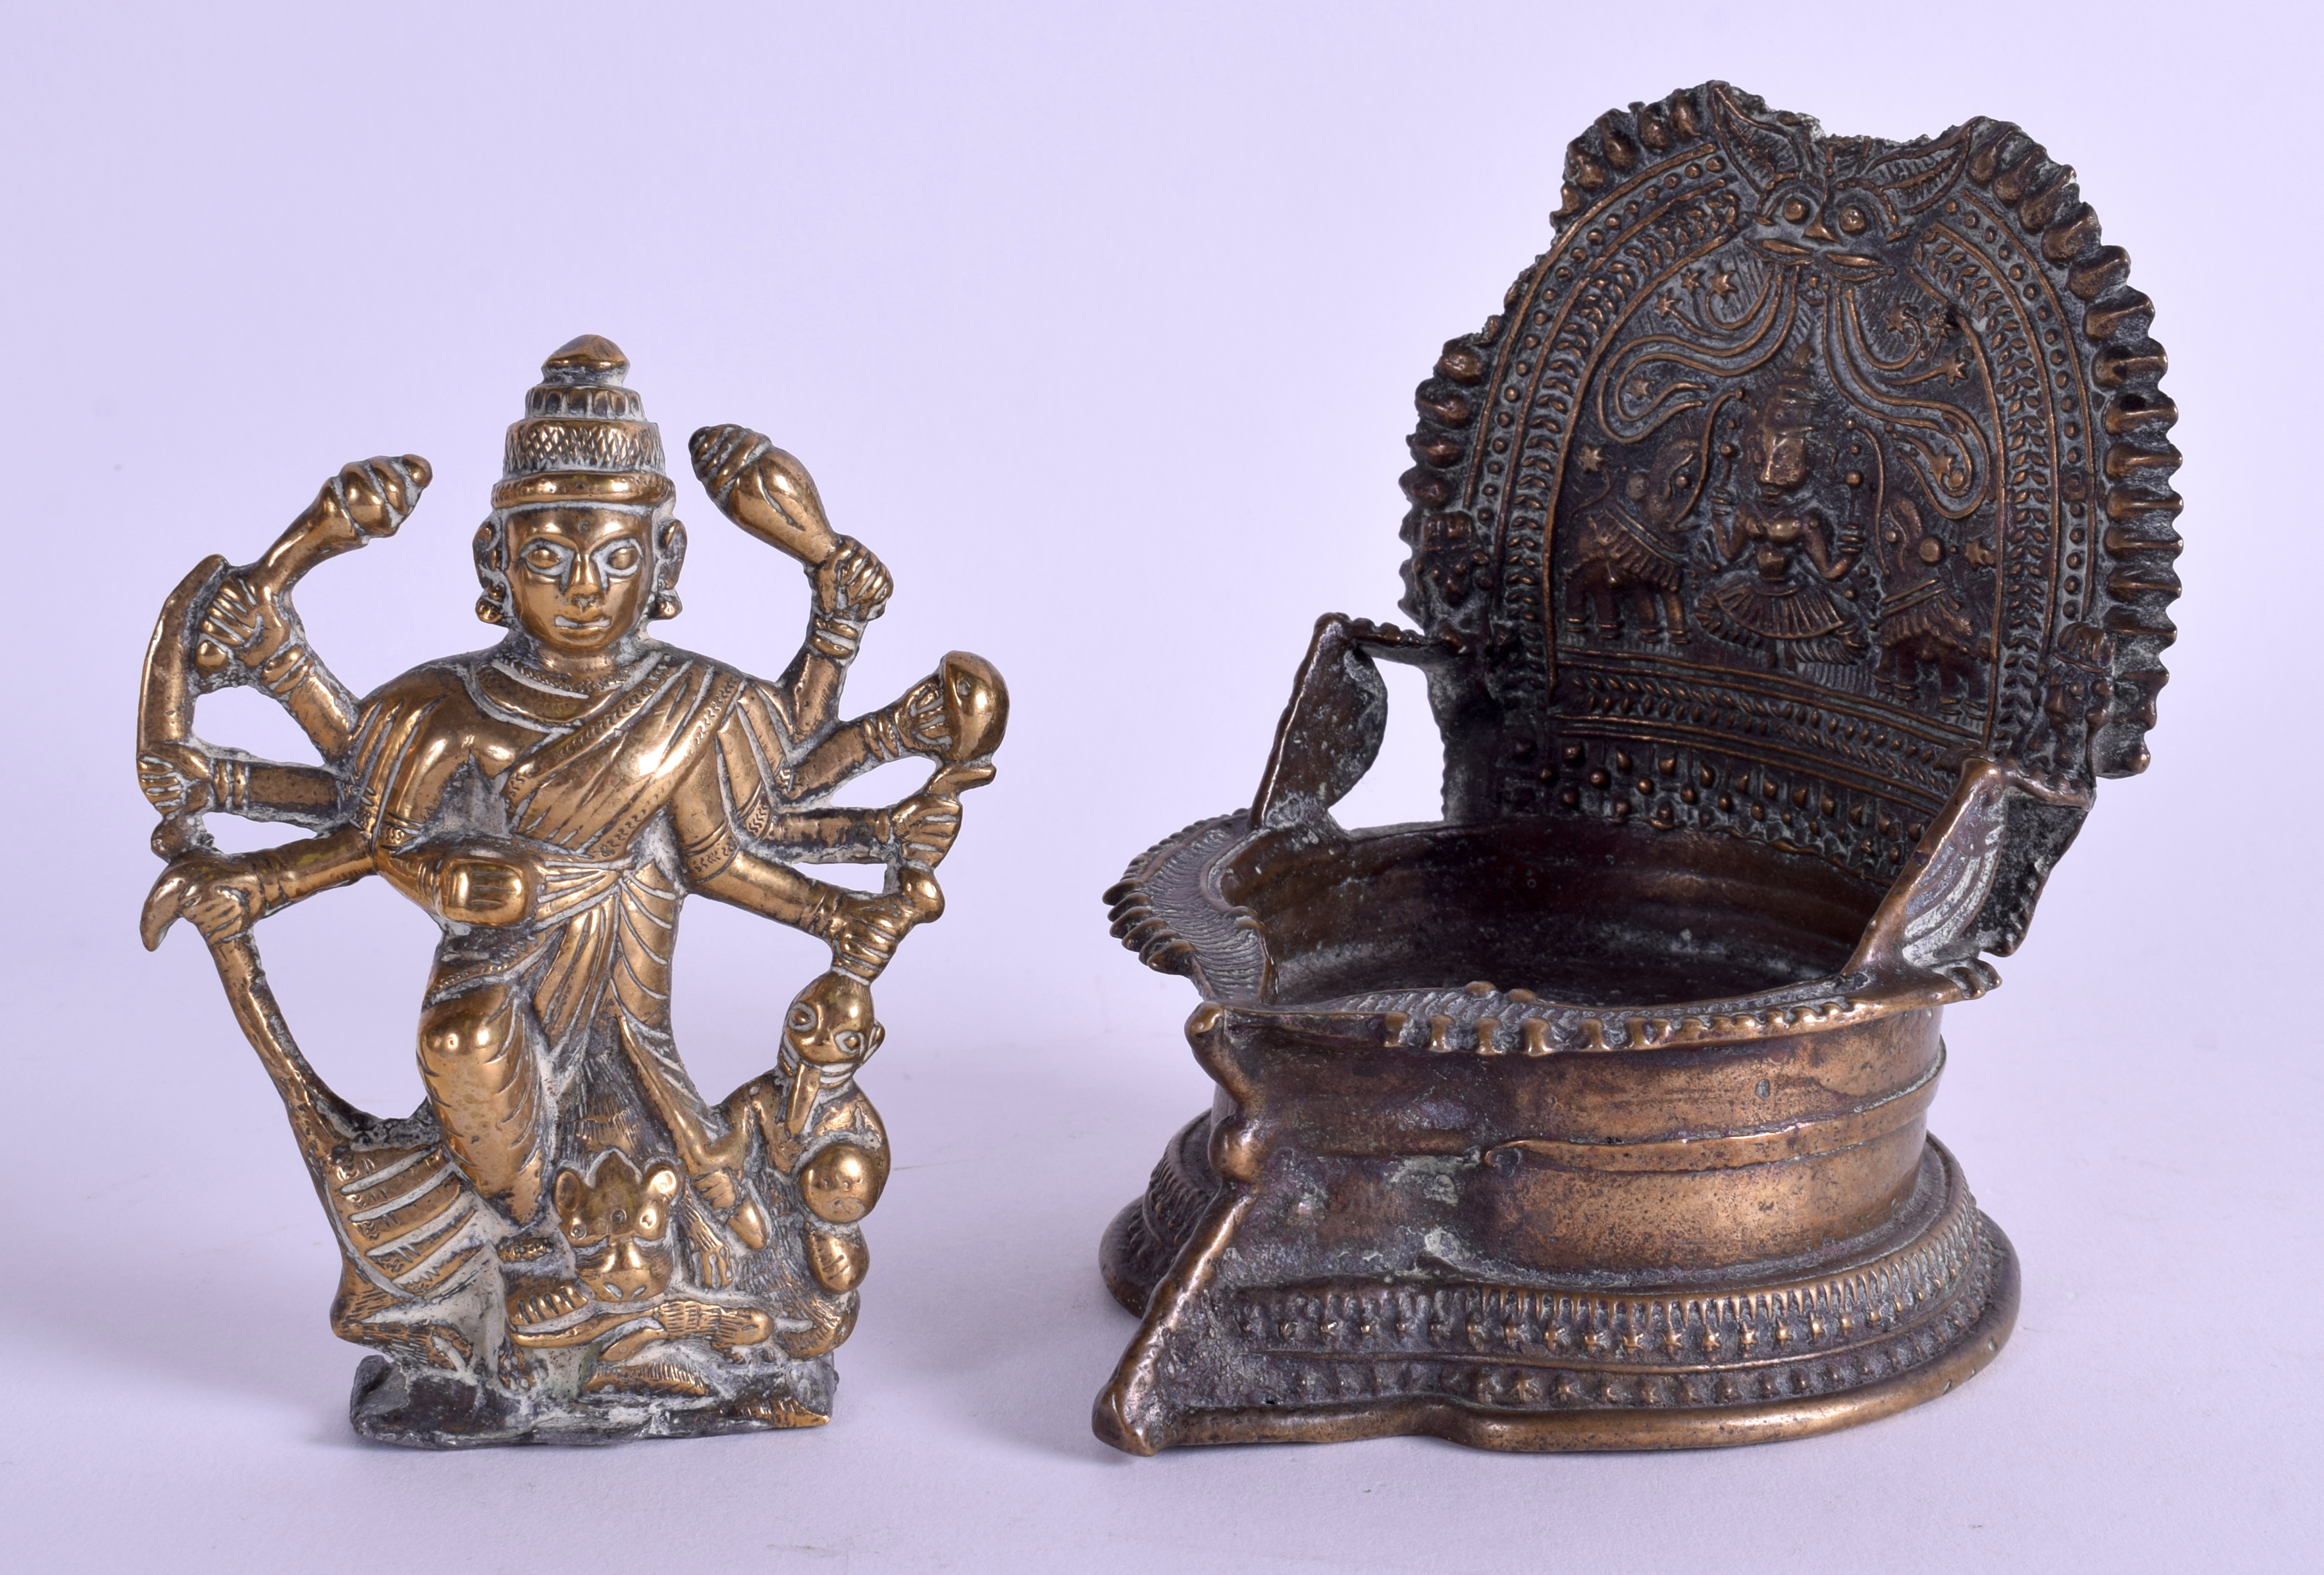 A 19TH CENTURY INDIAN BRONZE FIGURE OF A BUDDHIST DEITY together with an Eastern censer. 11 cm & 13